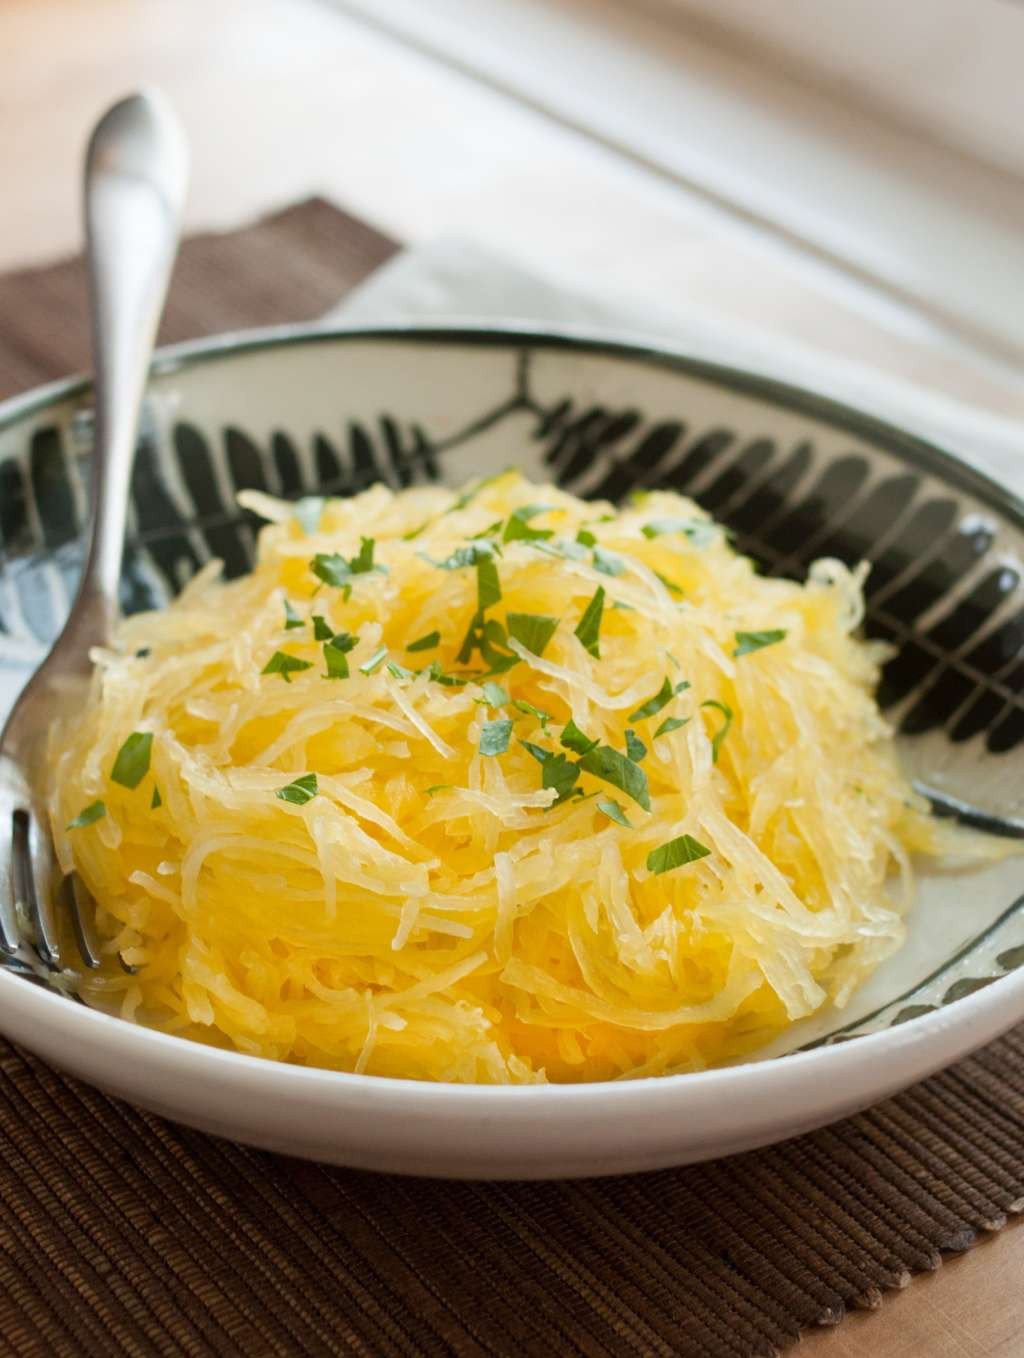 Cooking Spaghetti Squash In Microwave
 How To Cook Spaghetti Squash in the Oven